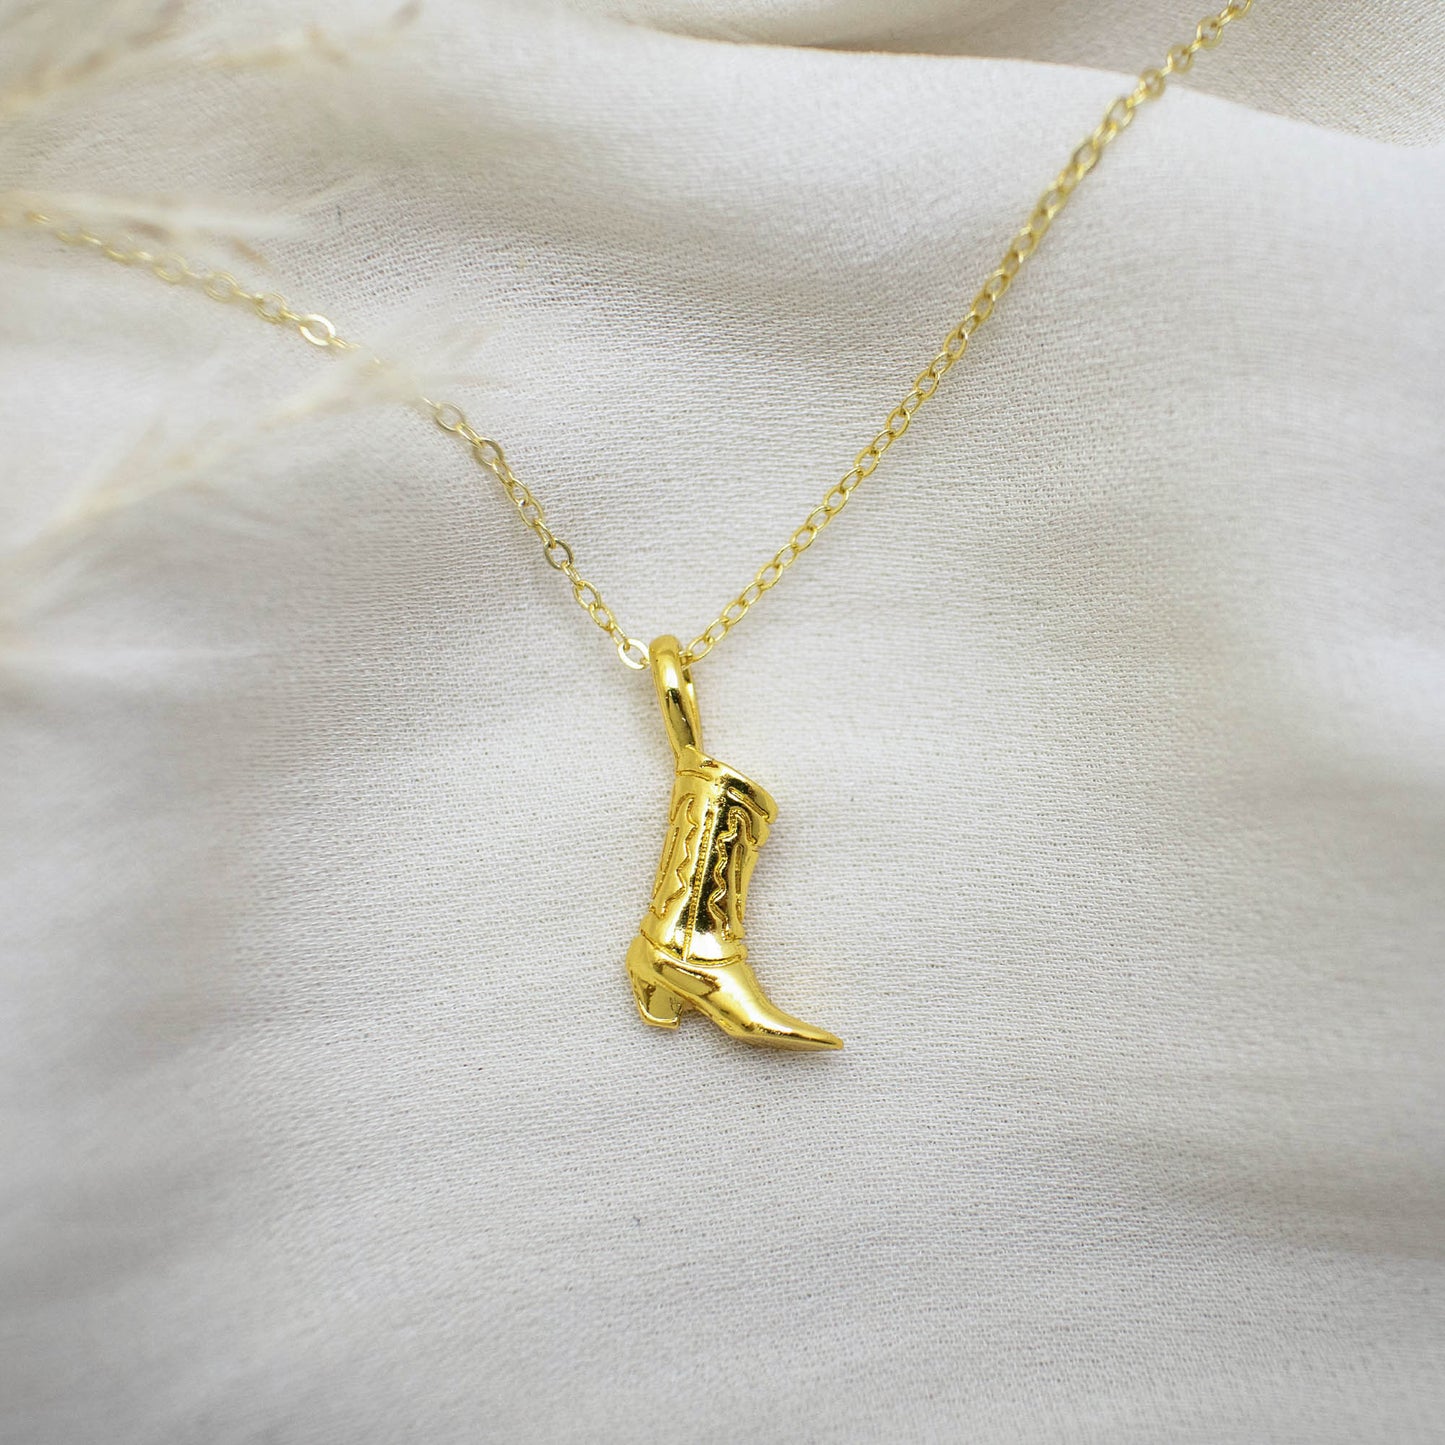 This photo features a thin chain necklace made of 14K gold-plated sterling silver, paired with a cute cowboy boot pendant.